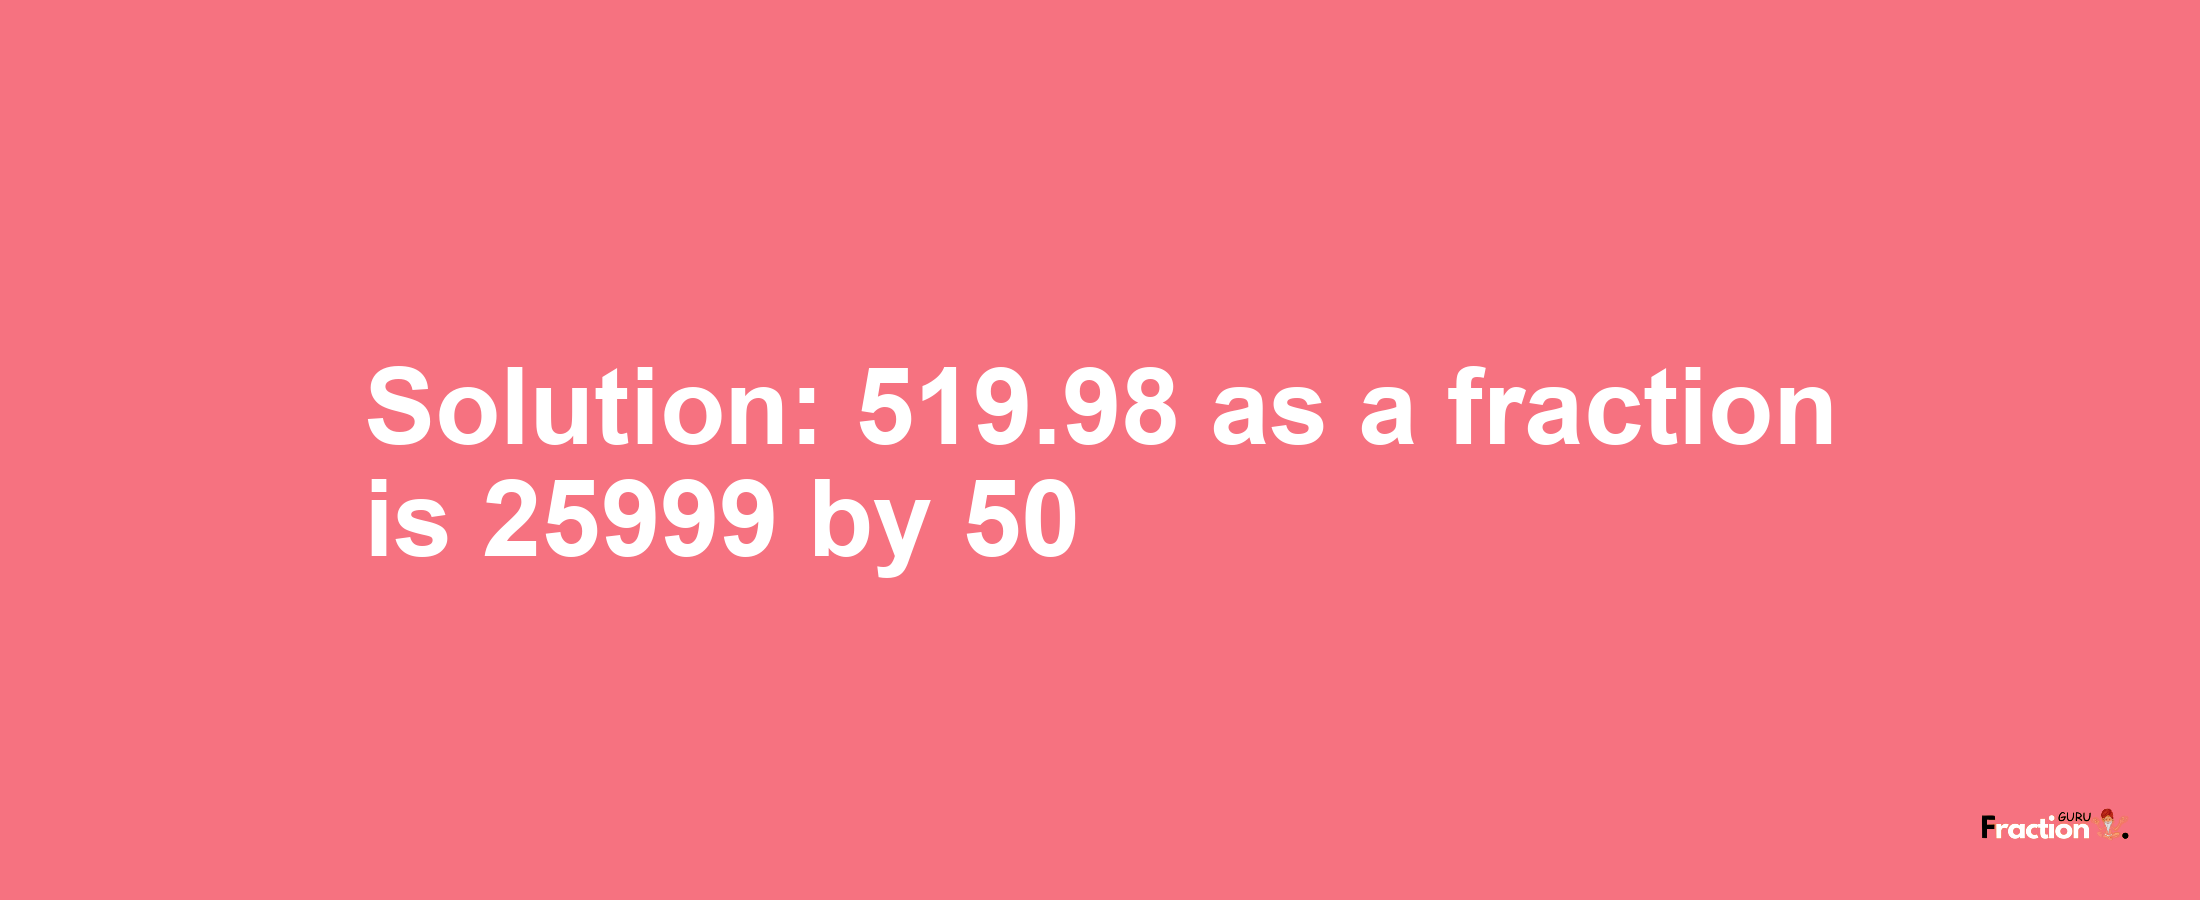 Solution:519.98 as a fraction is 25999/50